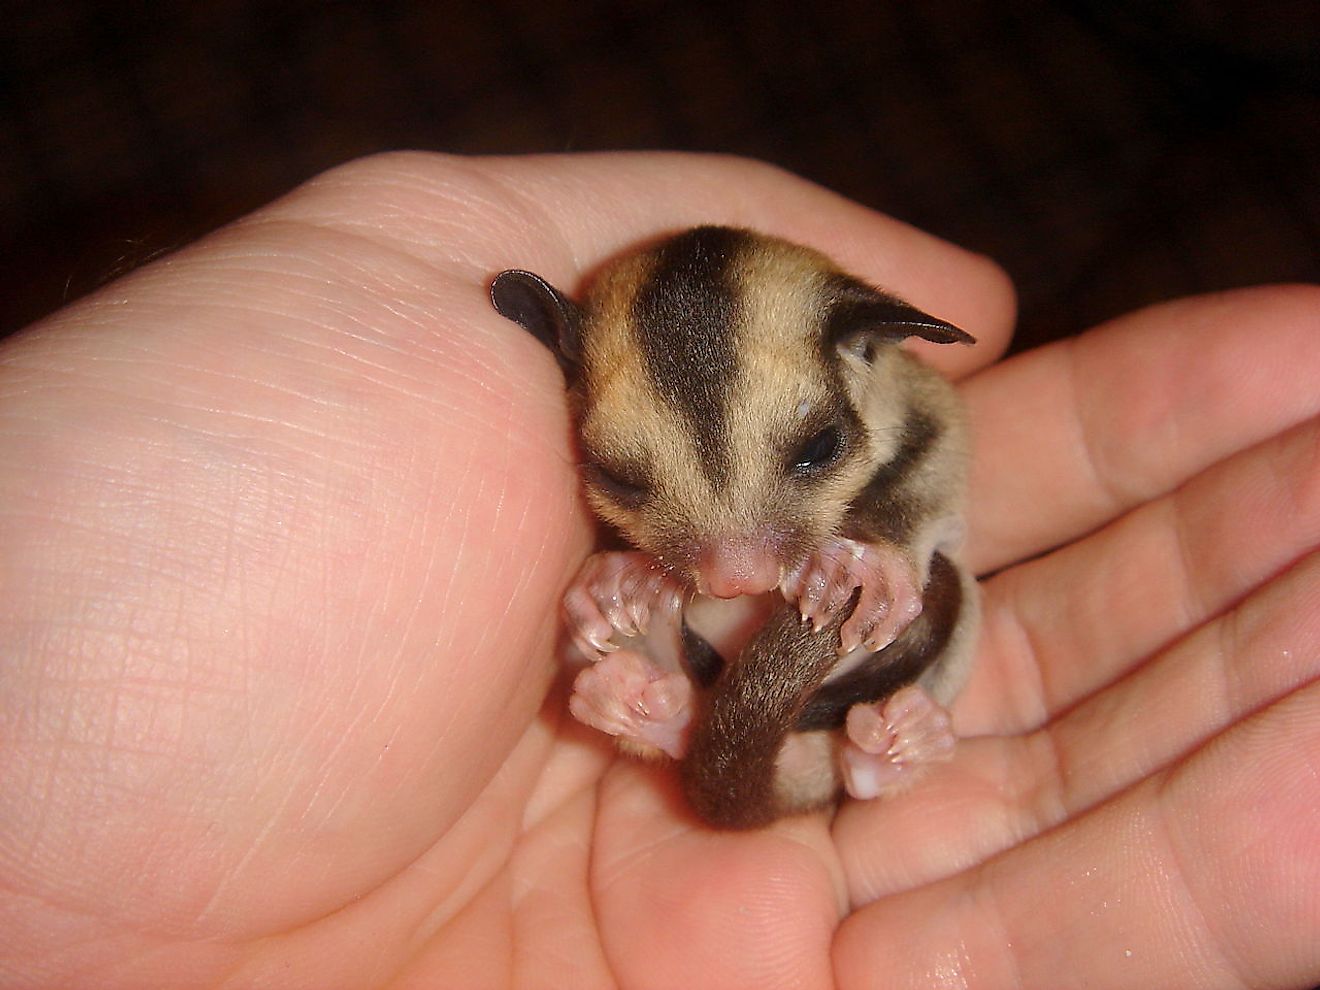 Sugar gliders might be adorable, but they do not belong to you but to nature where they must be left. Image credit: Wm Jas/Wikimedia.org